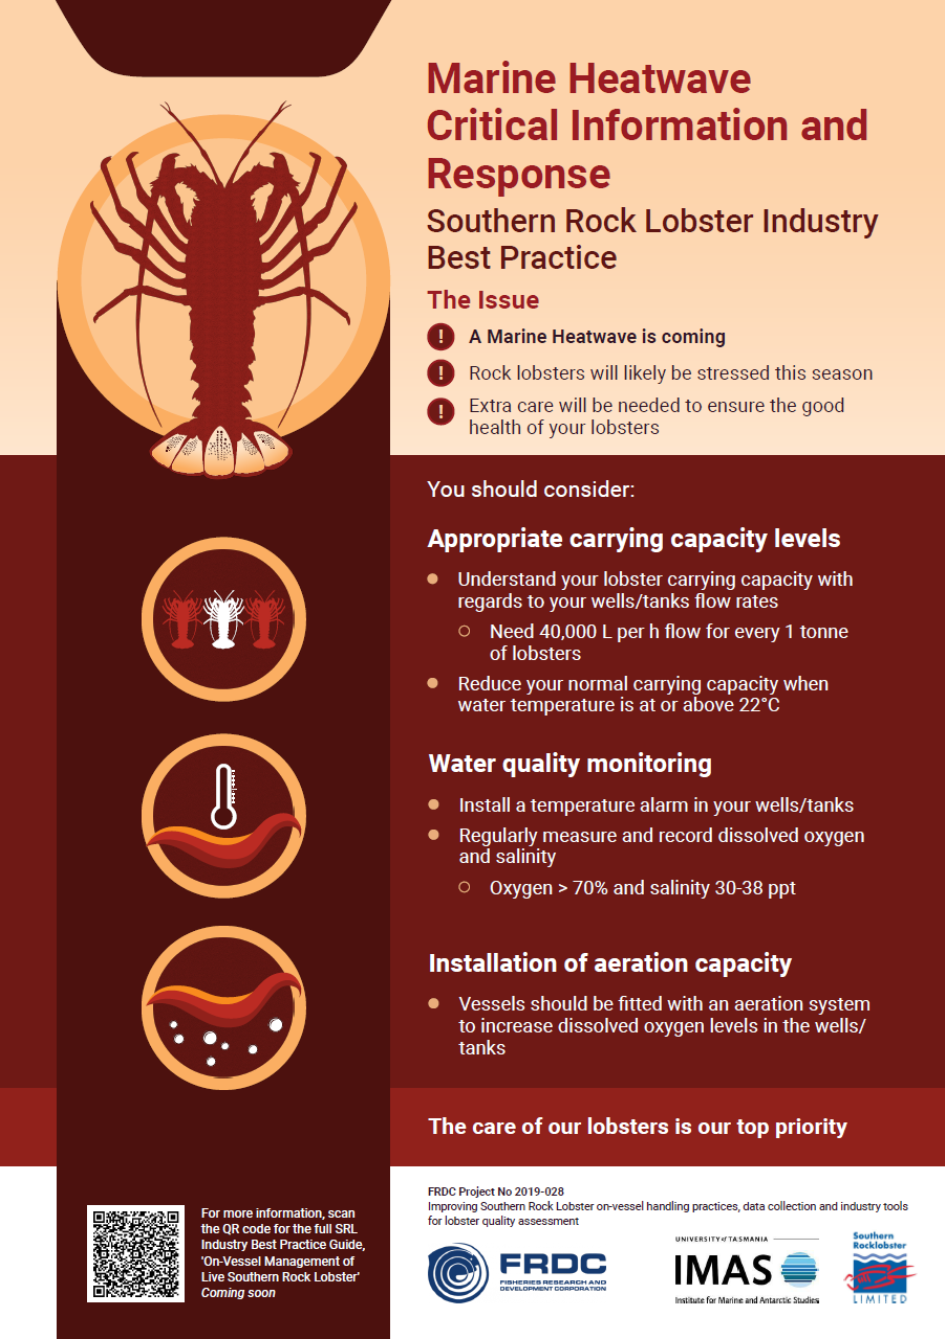 Southern Rock Lobster Fact Sheet highlighting four most significant impacts for fishers